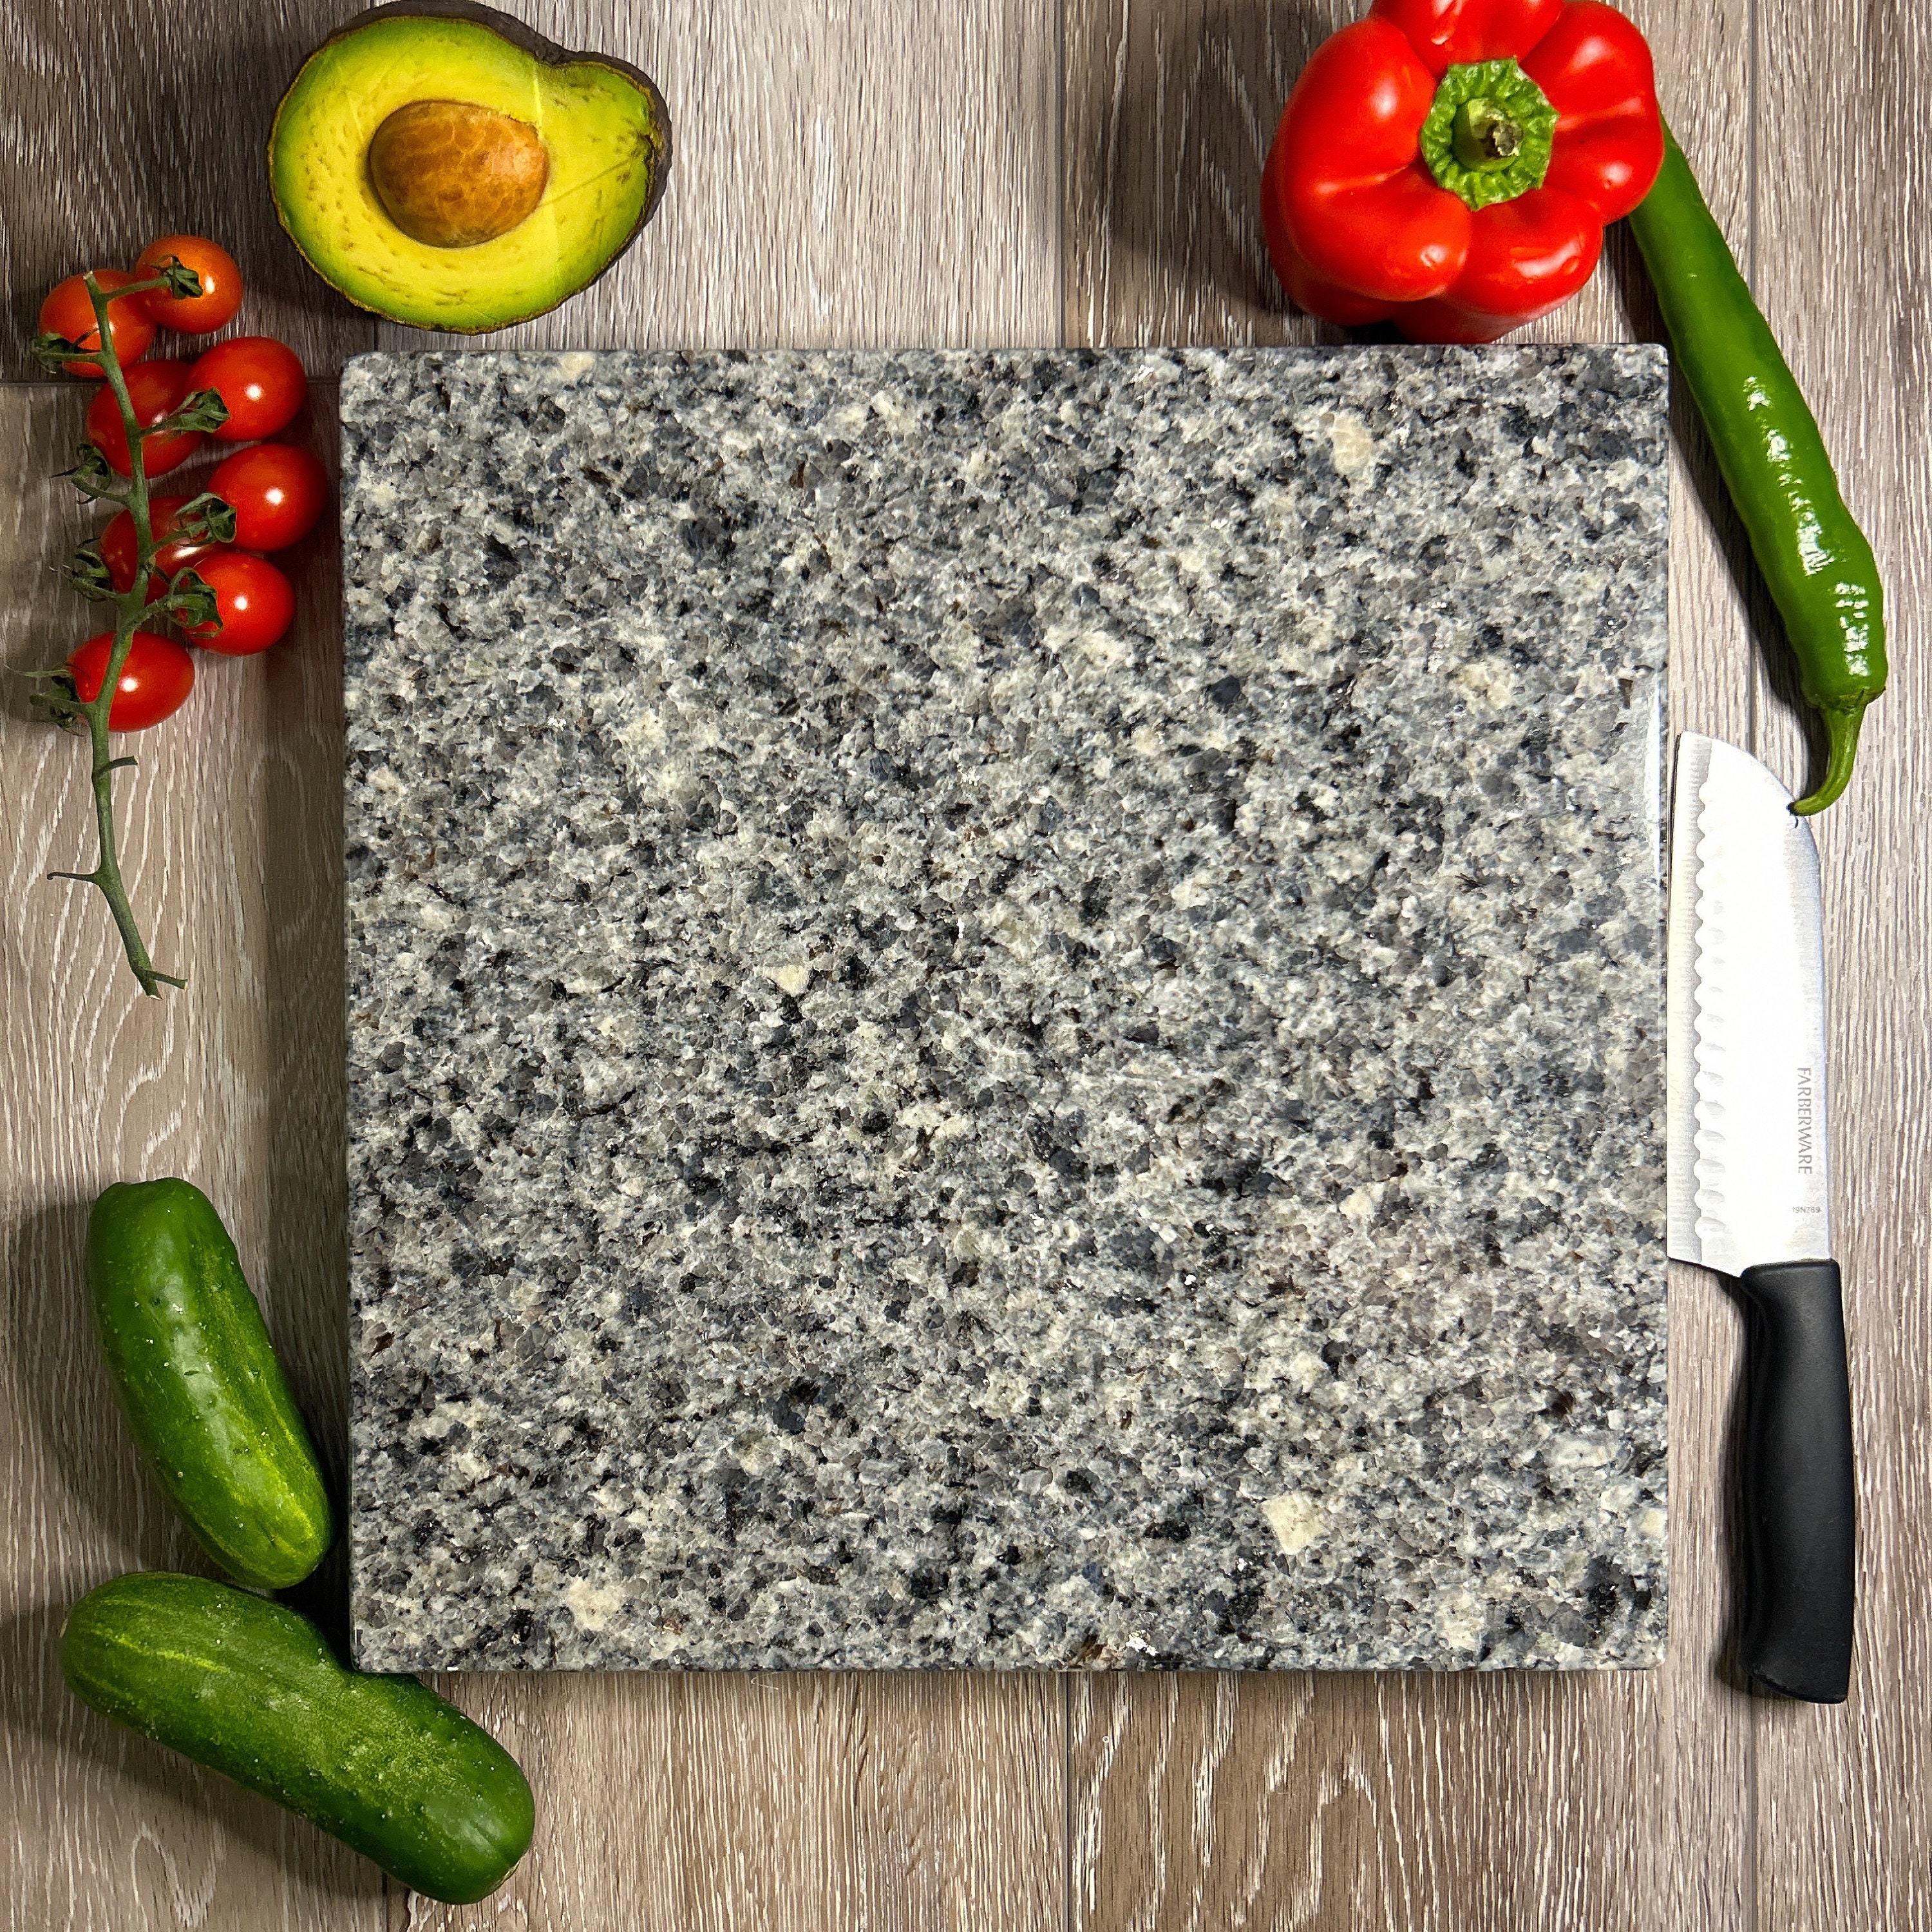 Natural Black Granite Pastry Cheese And Cutting Serving Board